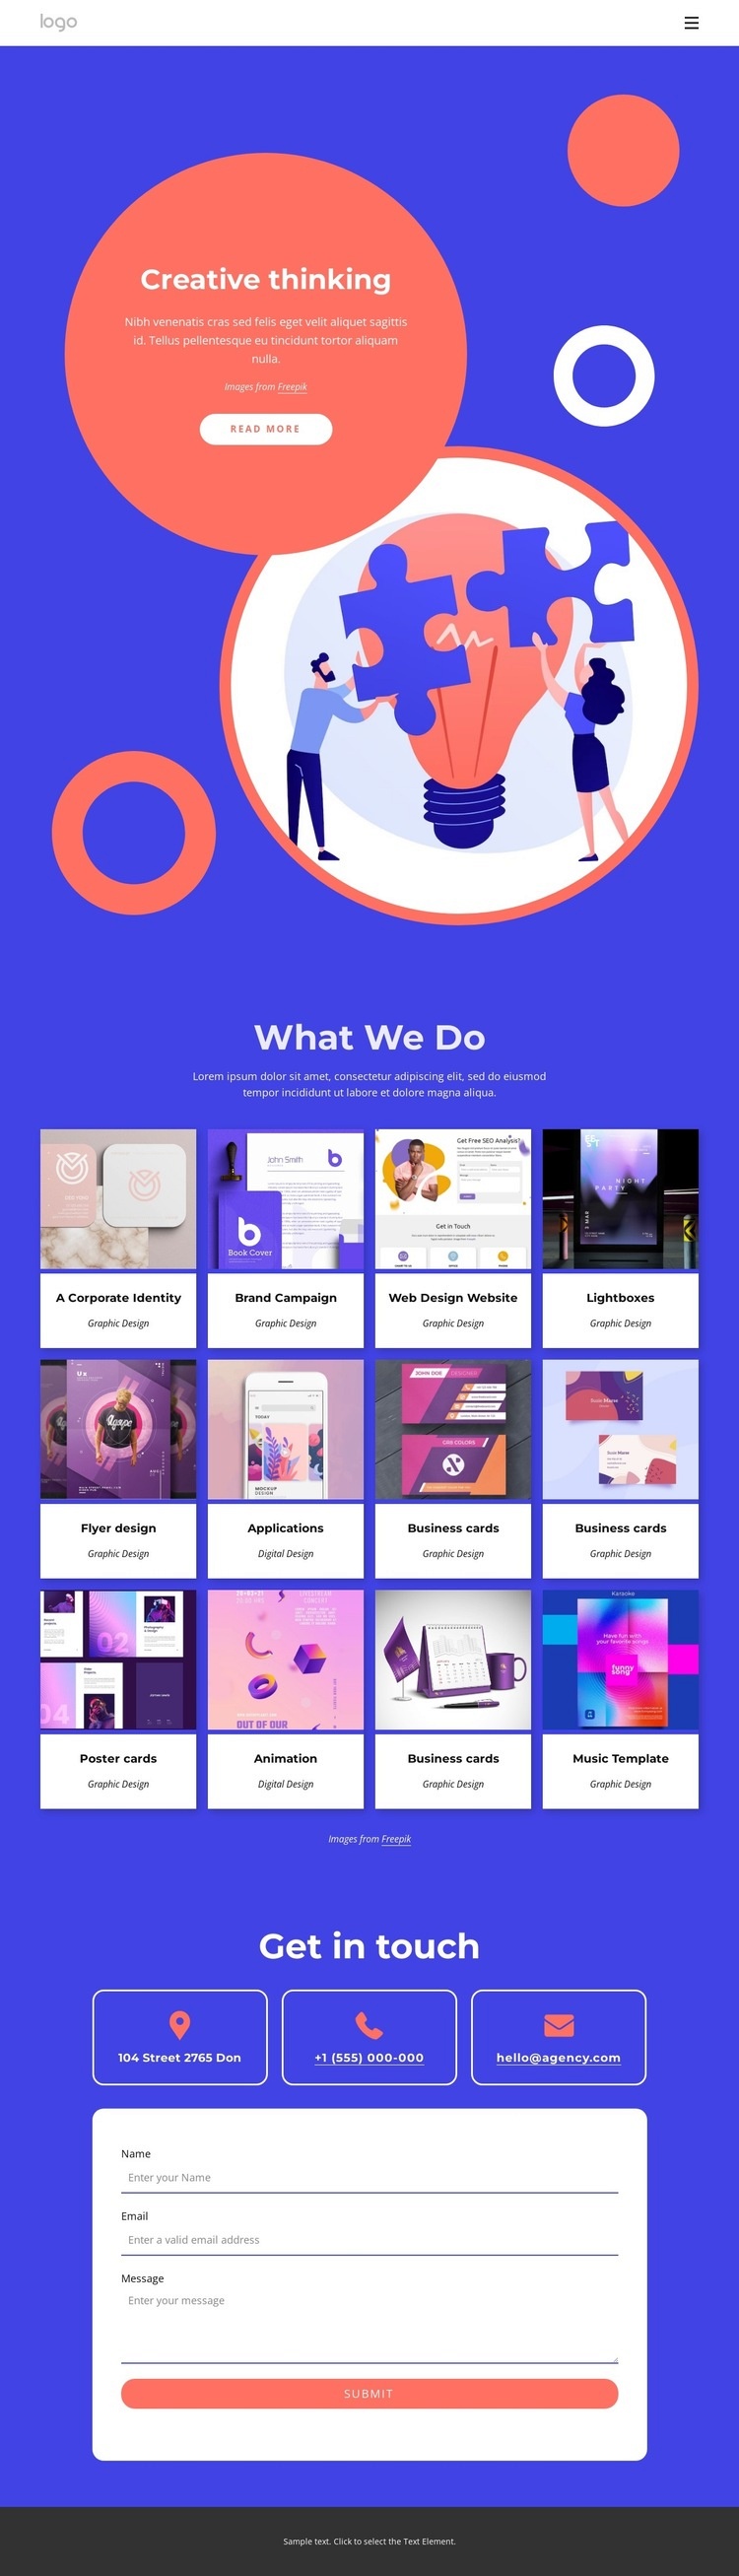 Campaigns, mobile and digital Webflow Template Alternative